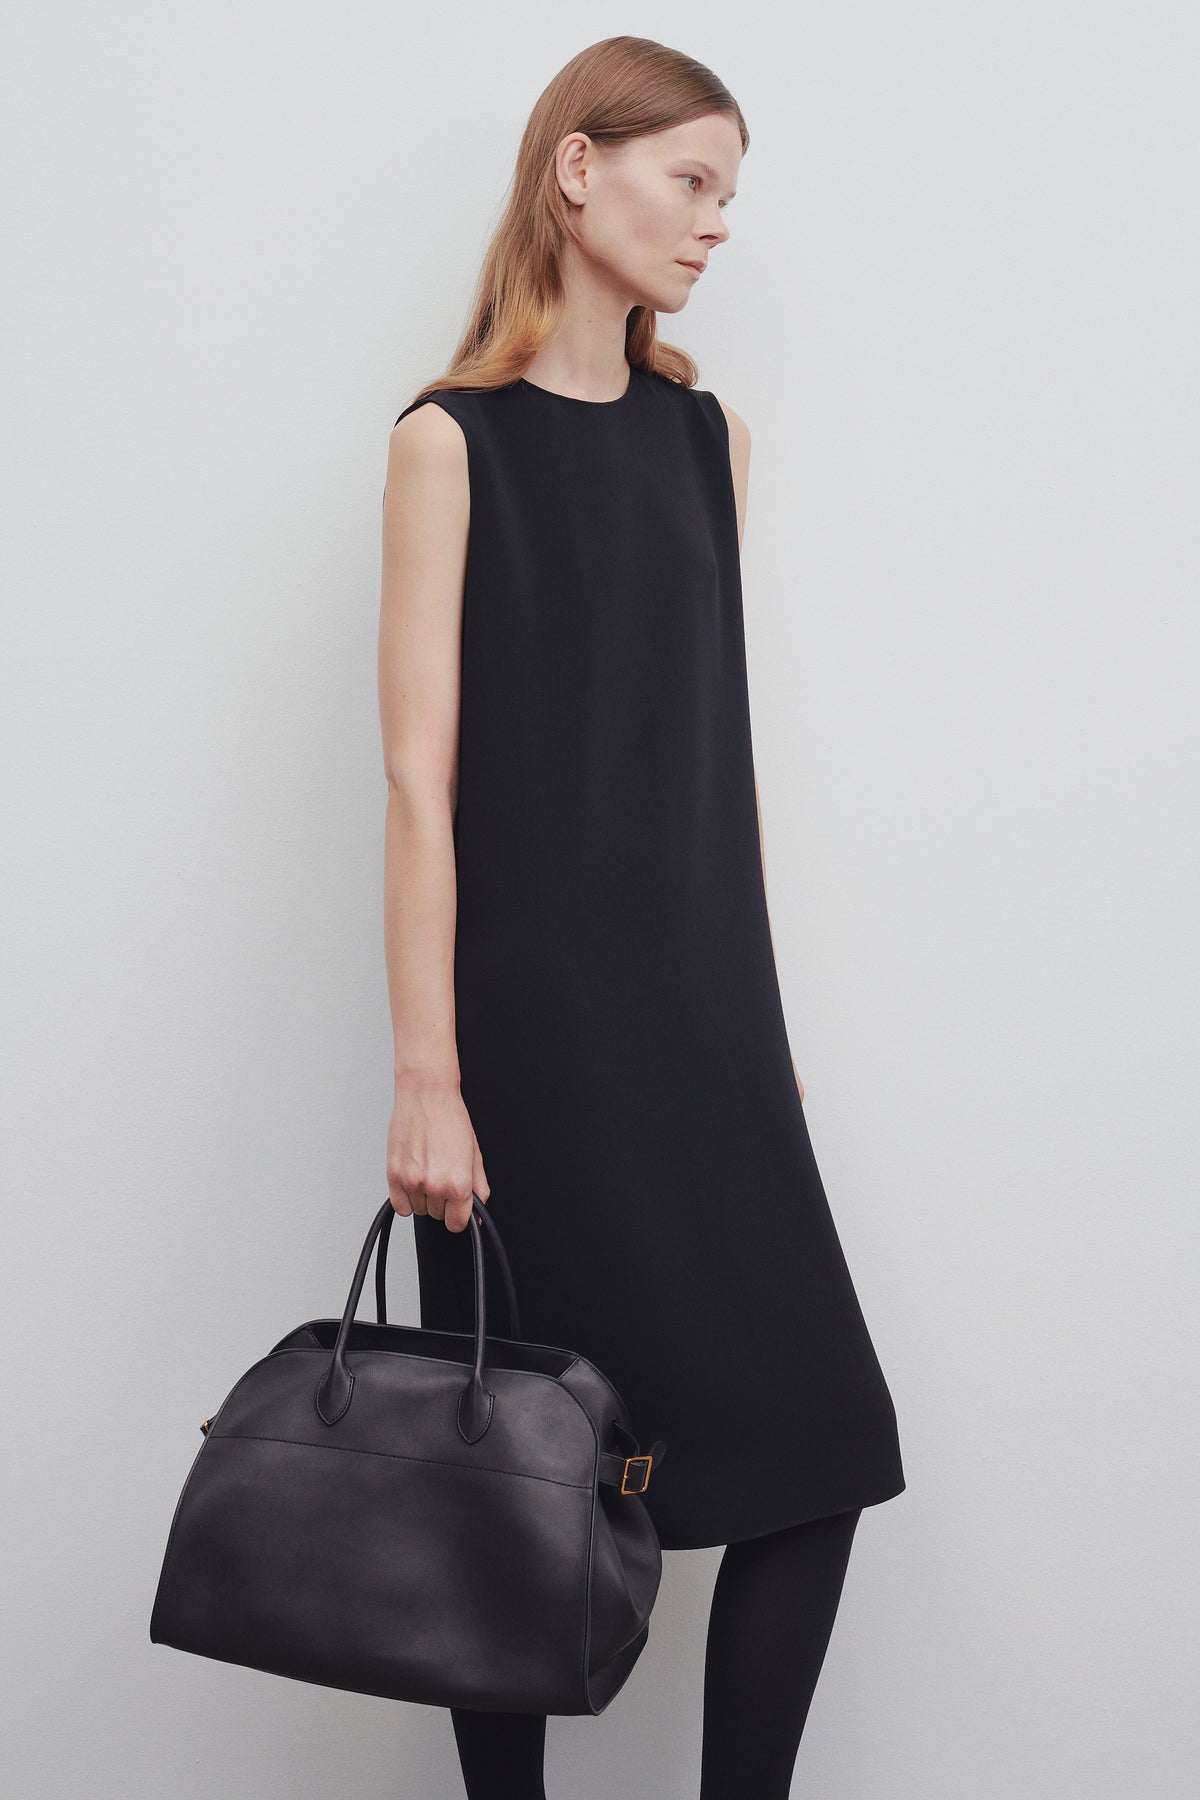 The Row - Soft Margaux 17 Bag in Leather - Black - One Size